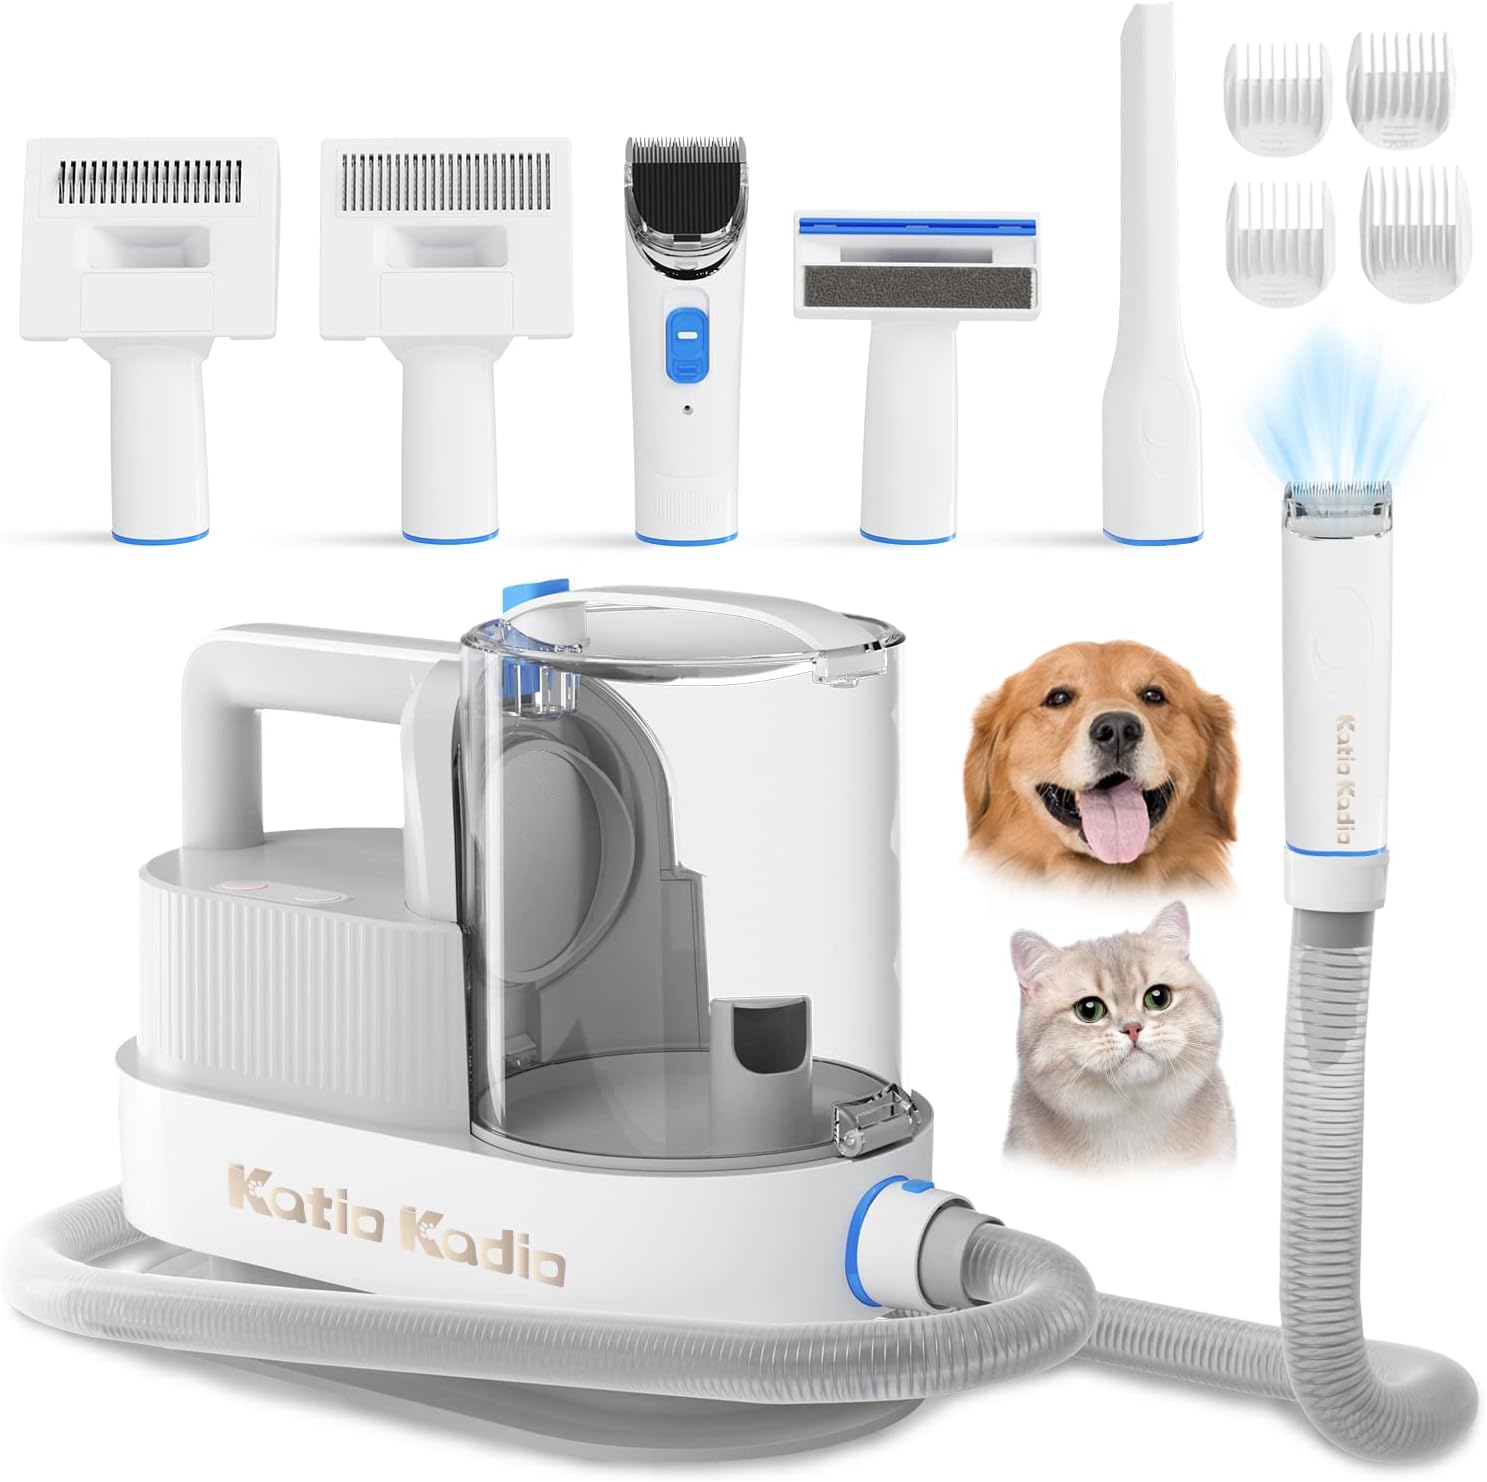 Katio Kadio Dog Groomer Pet Hair Remover Vacuum – The Ultimate Hair Removal Solution for Pet Owners